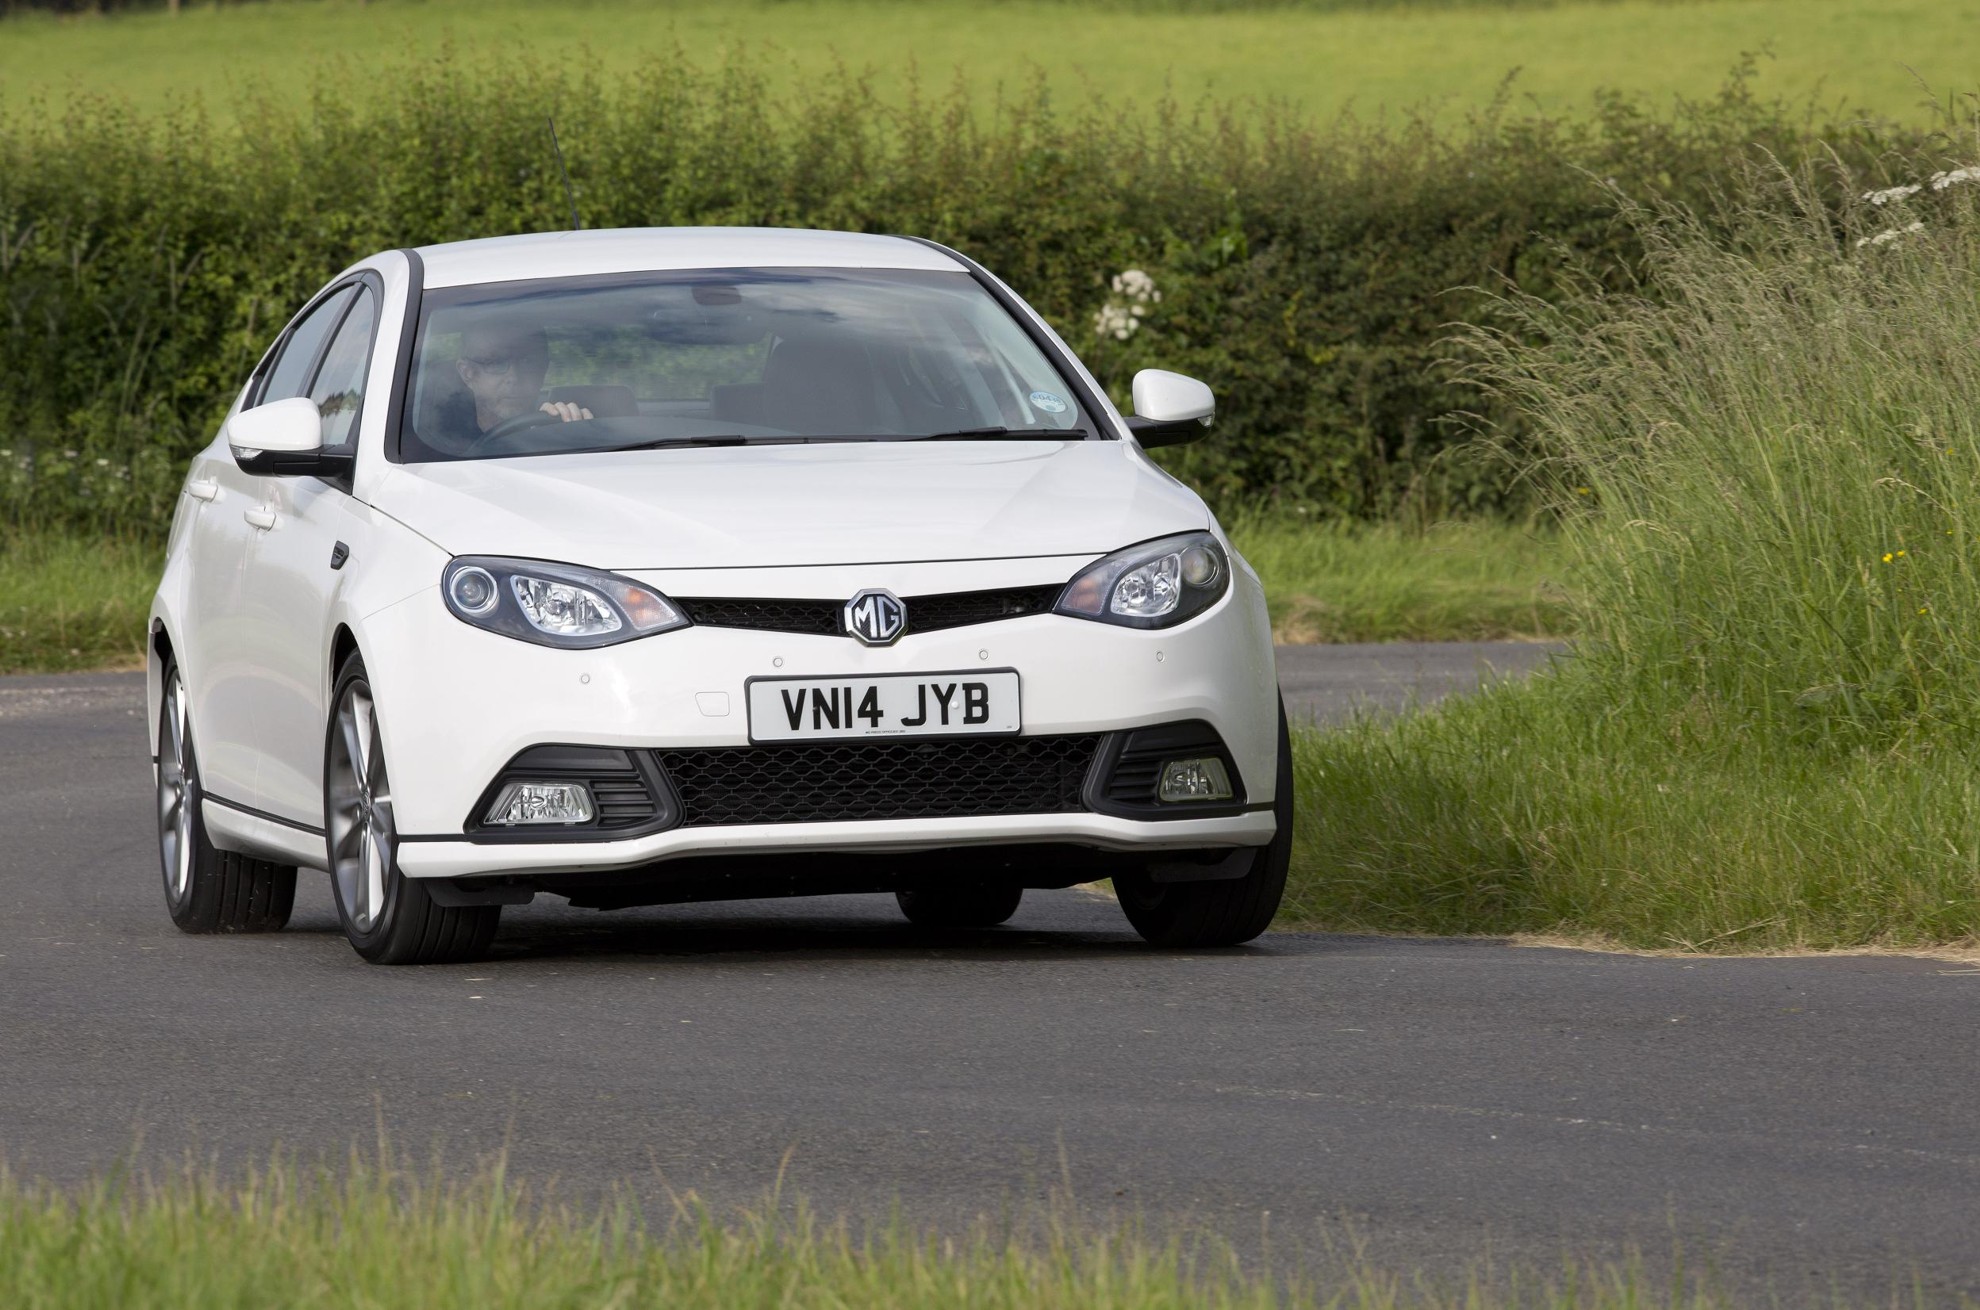 MG ANNOUNCES FLEET ORDER FOR MG6 WITH SMA VEHICLE REMARKETING